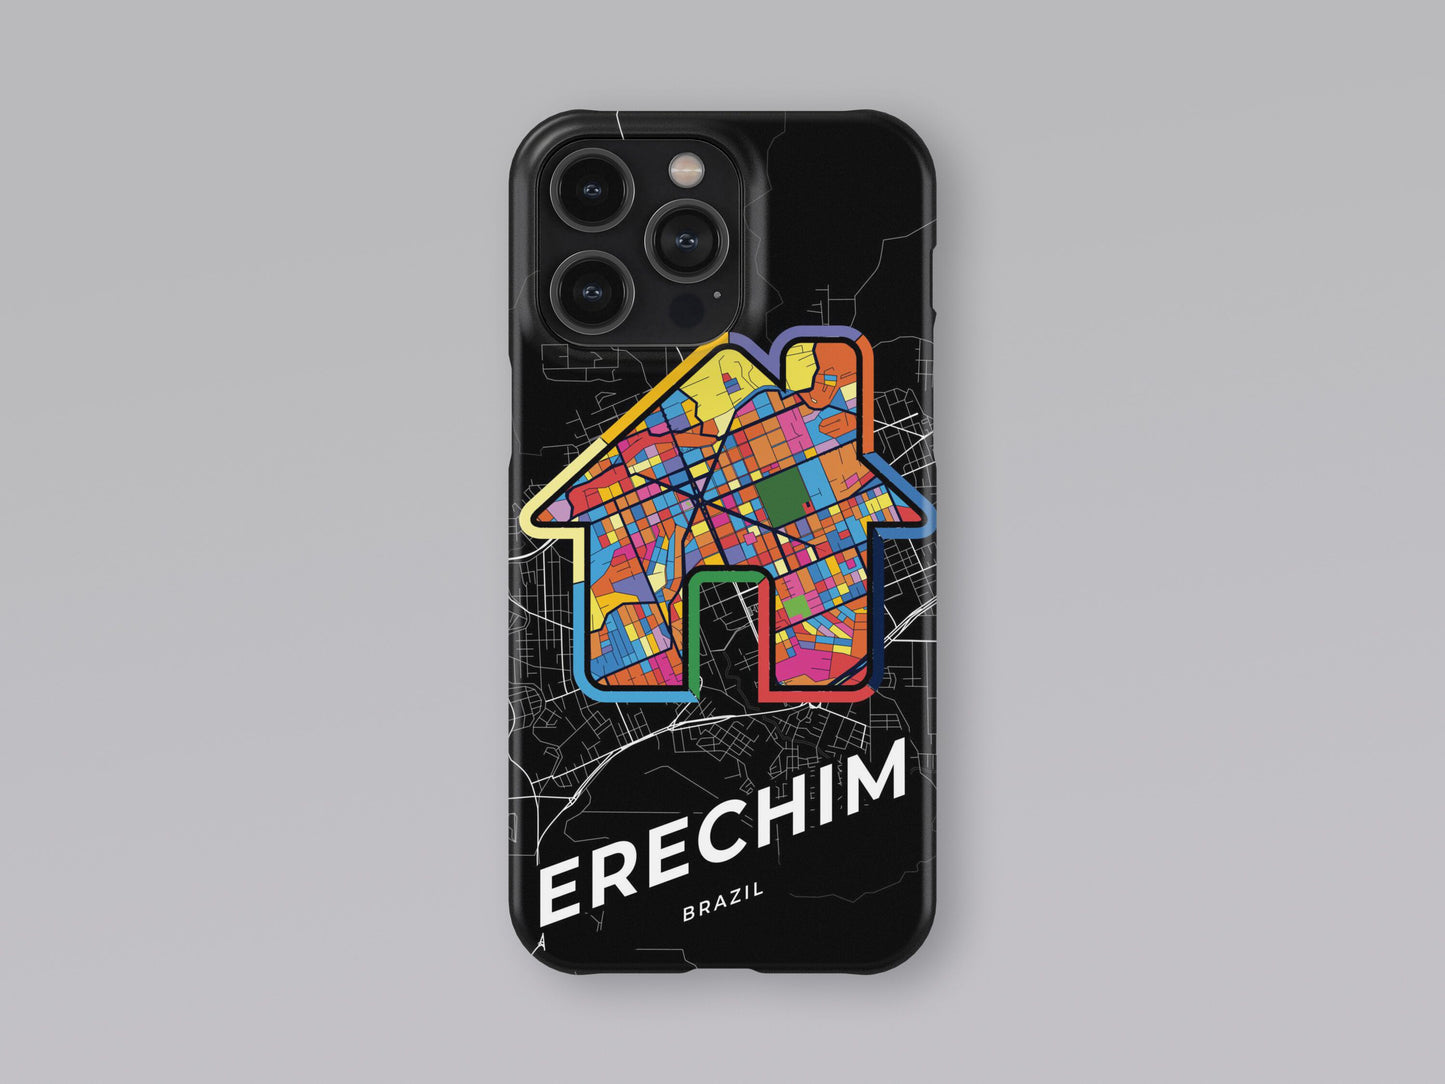 Erechim Brazil slim phone case with colorful icon. Birthday, wedding or housewarming gift. Couple match cases. 3